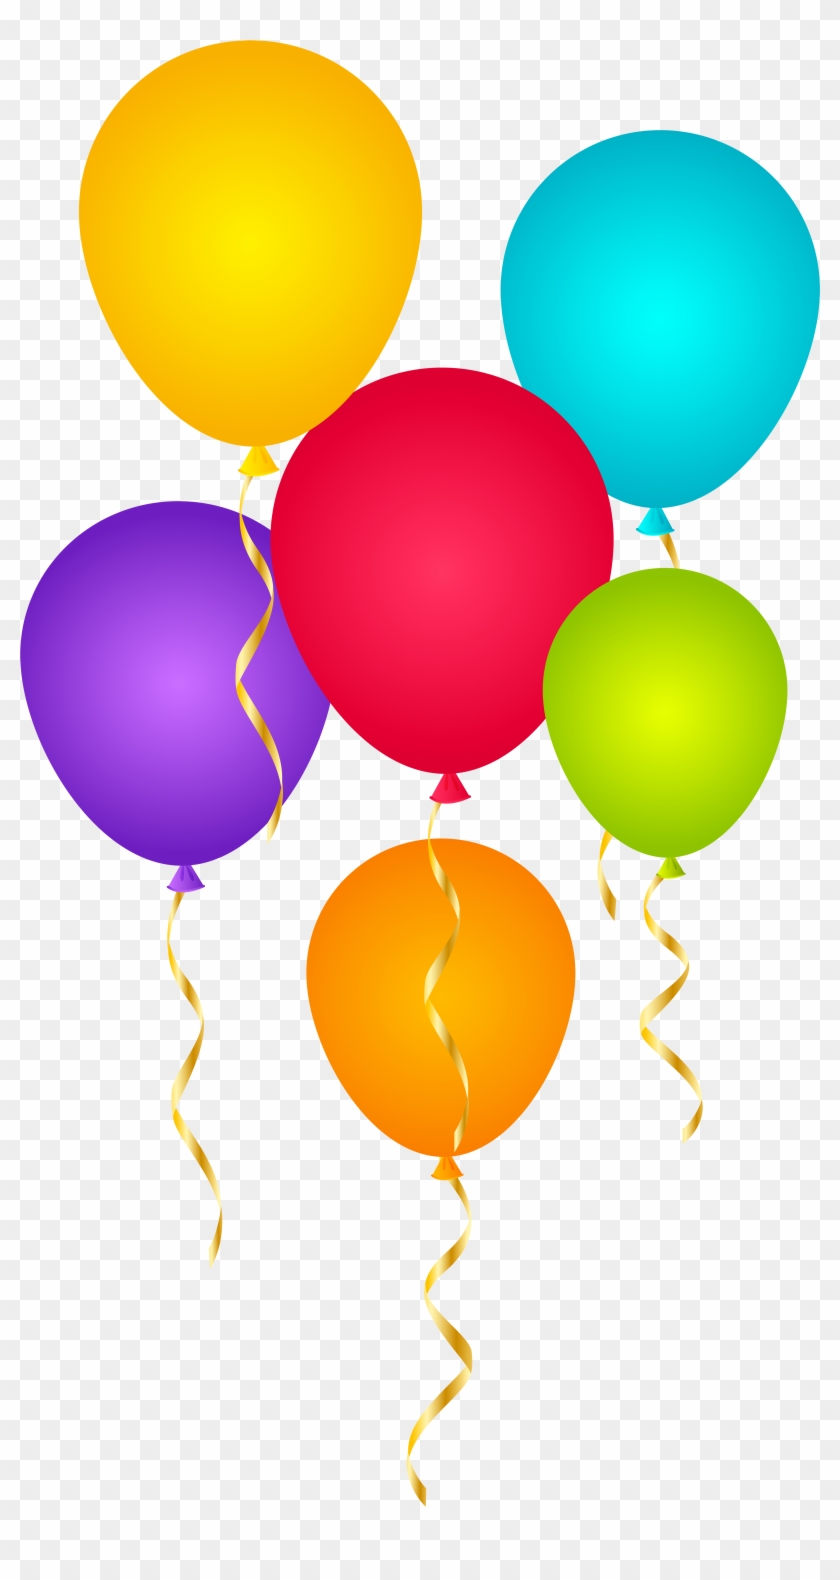 Balloons Png Clip Art - Balloons High Resolution Pictures Png #350750